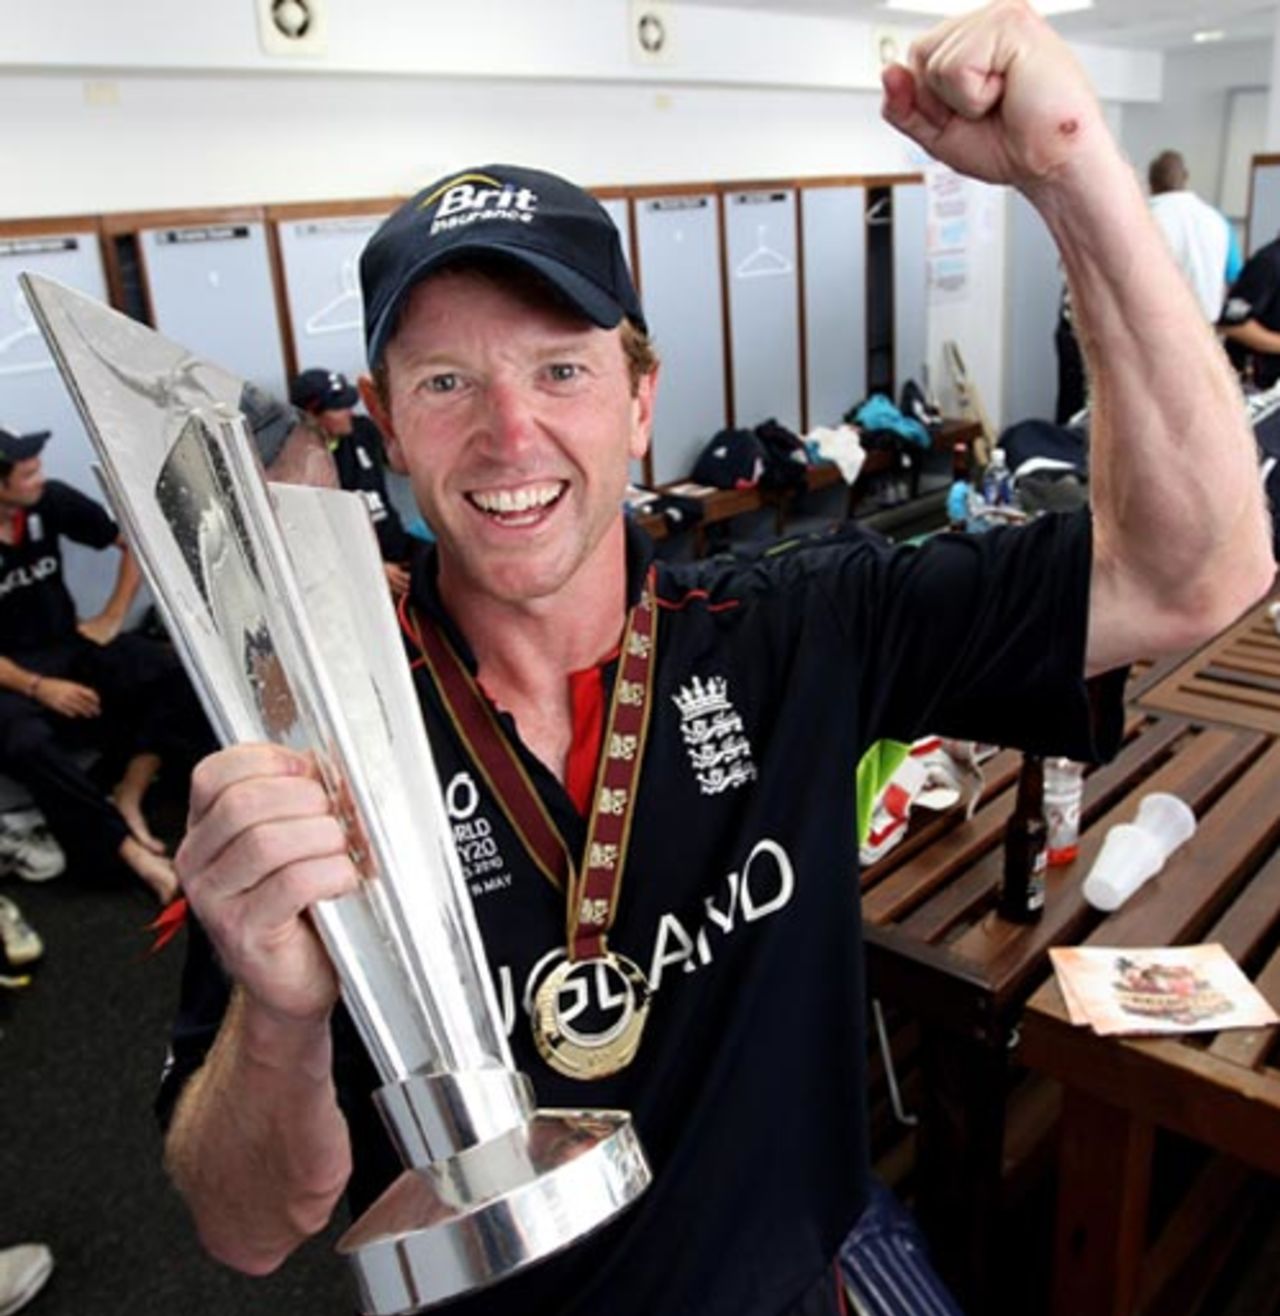 Paul Collingwood with the trophy in the dressing room, England v Australia, ICC World Twenty20 final, Barbados, May 16, 2010